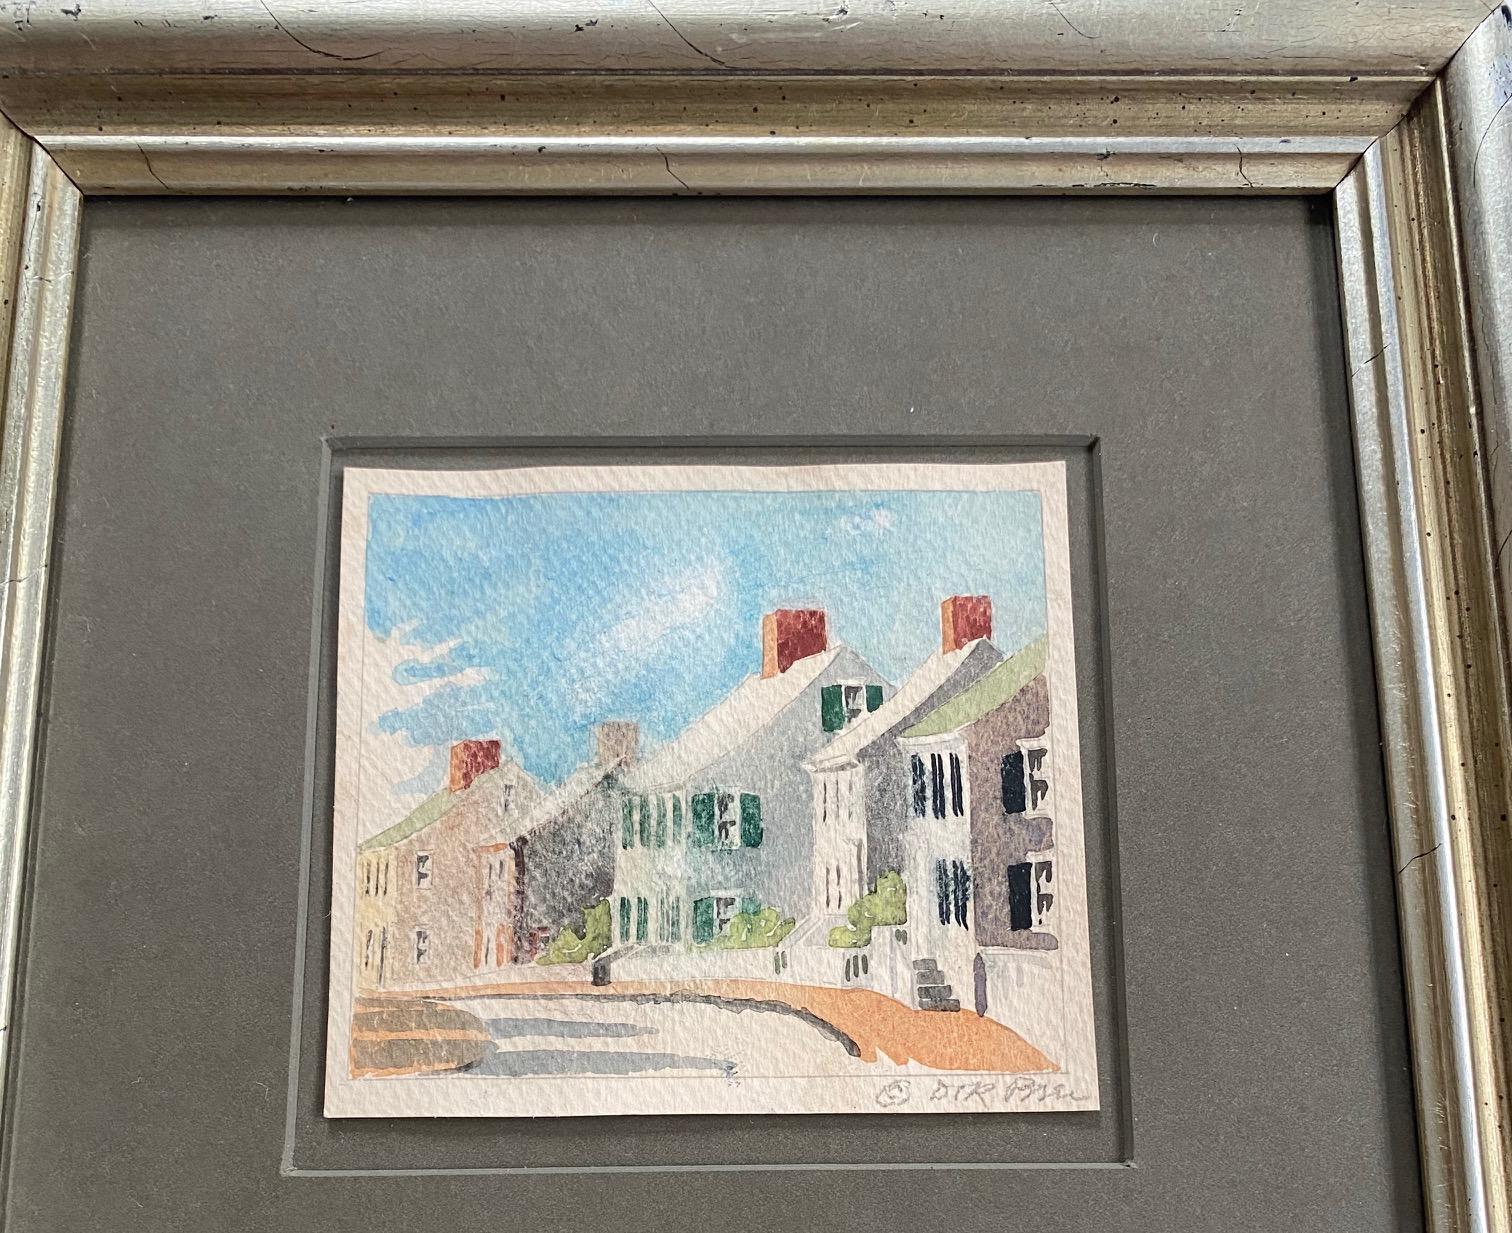 Vintage Nantucket Watercolor by Doris & Richard Beer, circa 1940, a watercolor on paper view of Captain's Houses, signed in pencil lower right. Doris and Richard Beer (1898-1967 and 1893-1959 respectively) produced a well-known series of watercolor